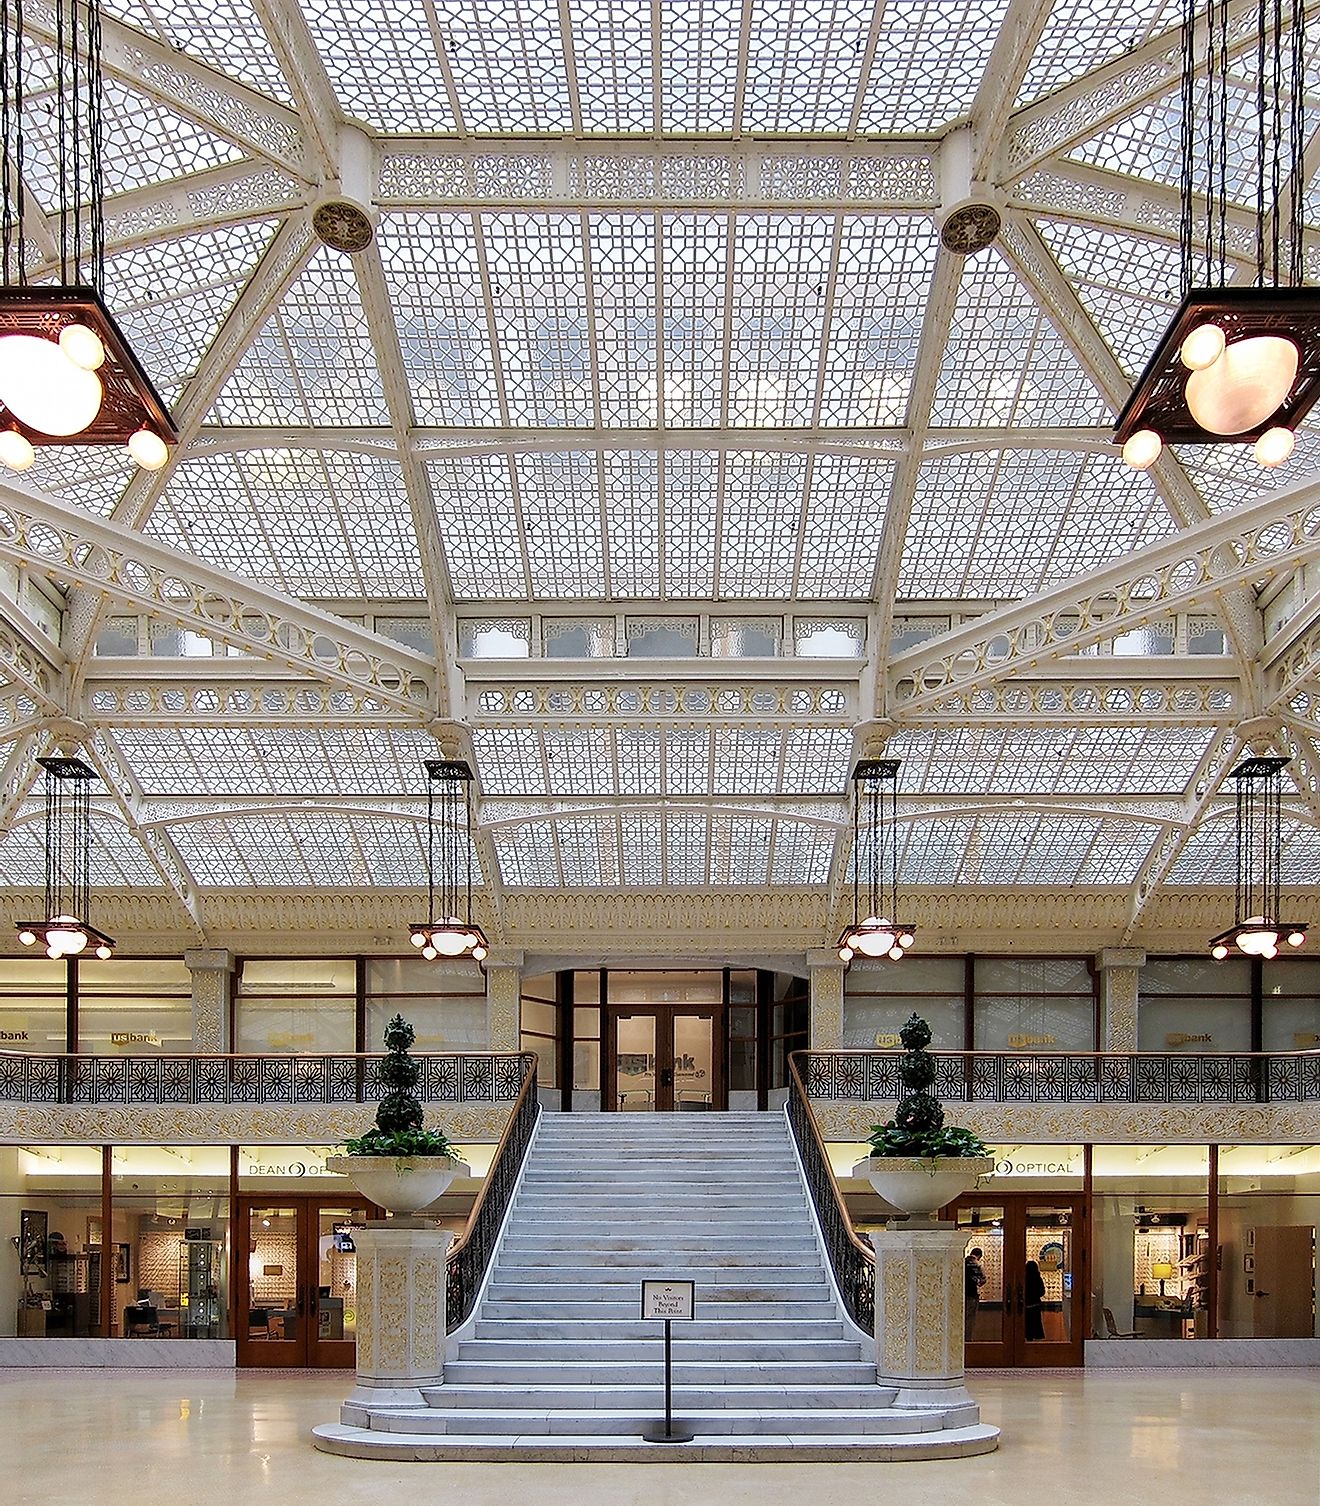 Central stair of the Rookery Building in Cook County, Chicago, USA.